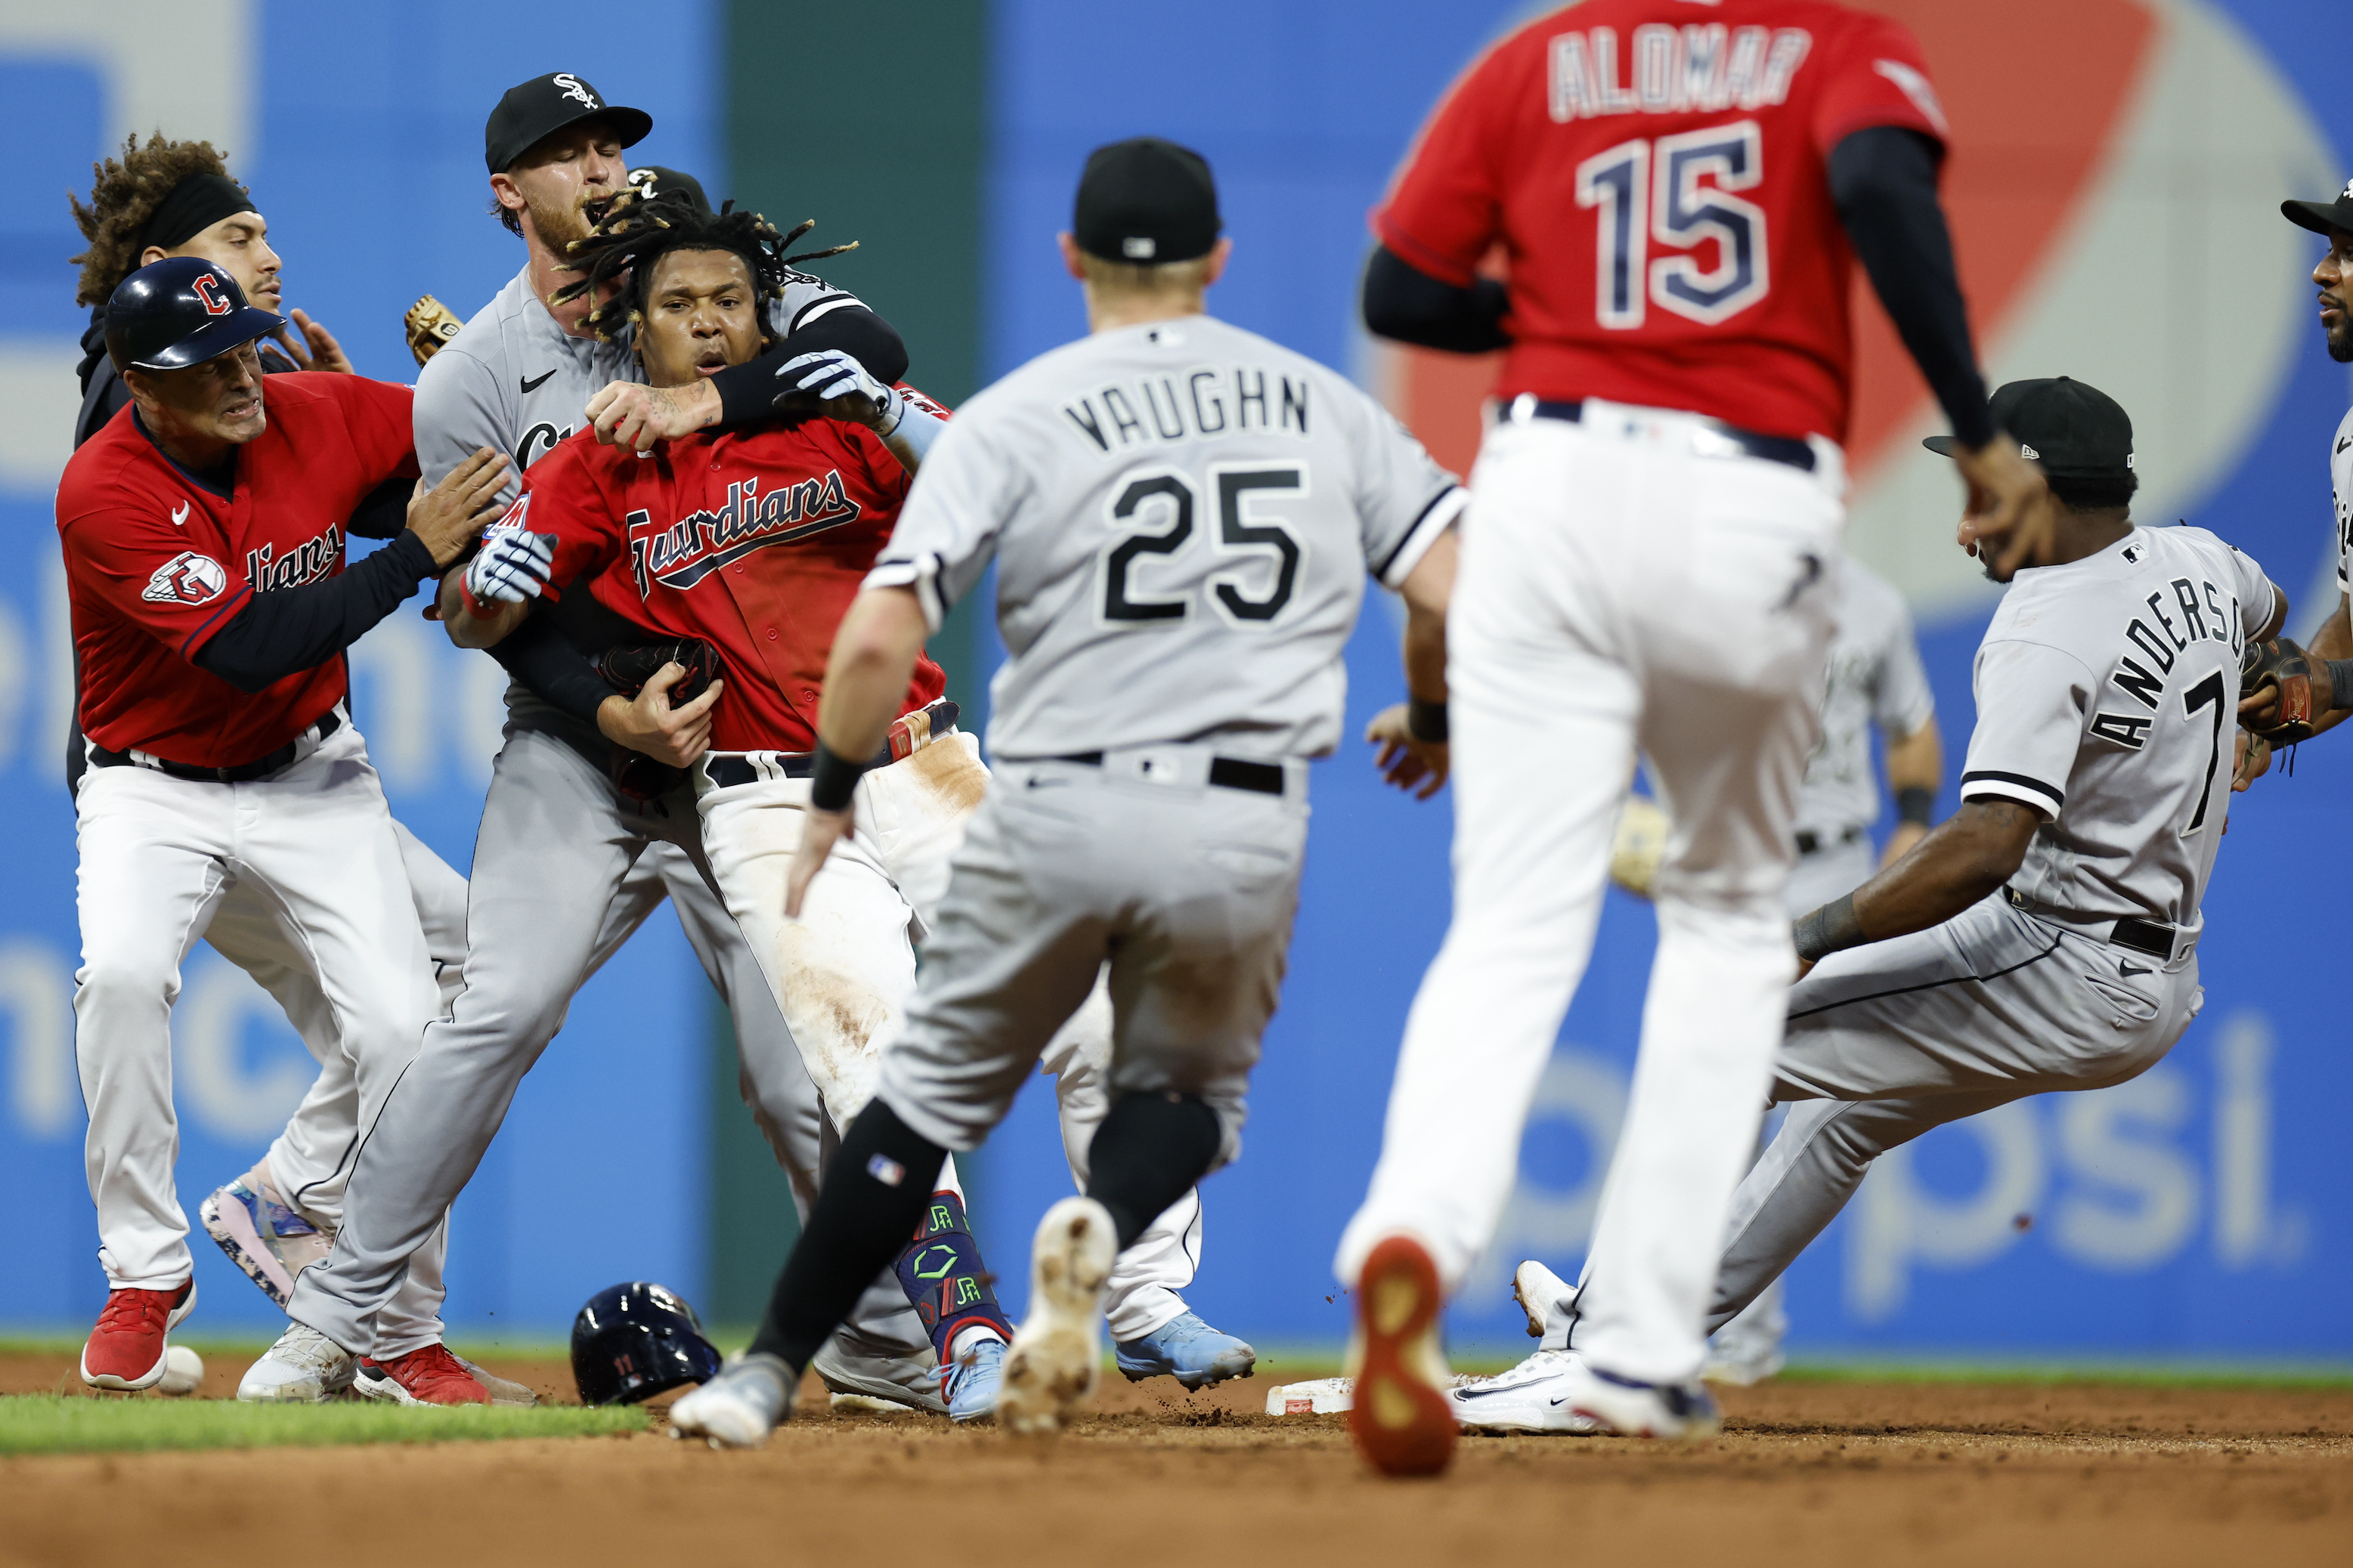 José Ramirez And Tim Anderson Had A Real Fight, Not A Baseball Fight